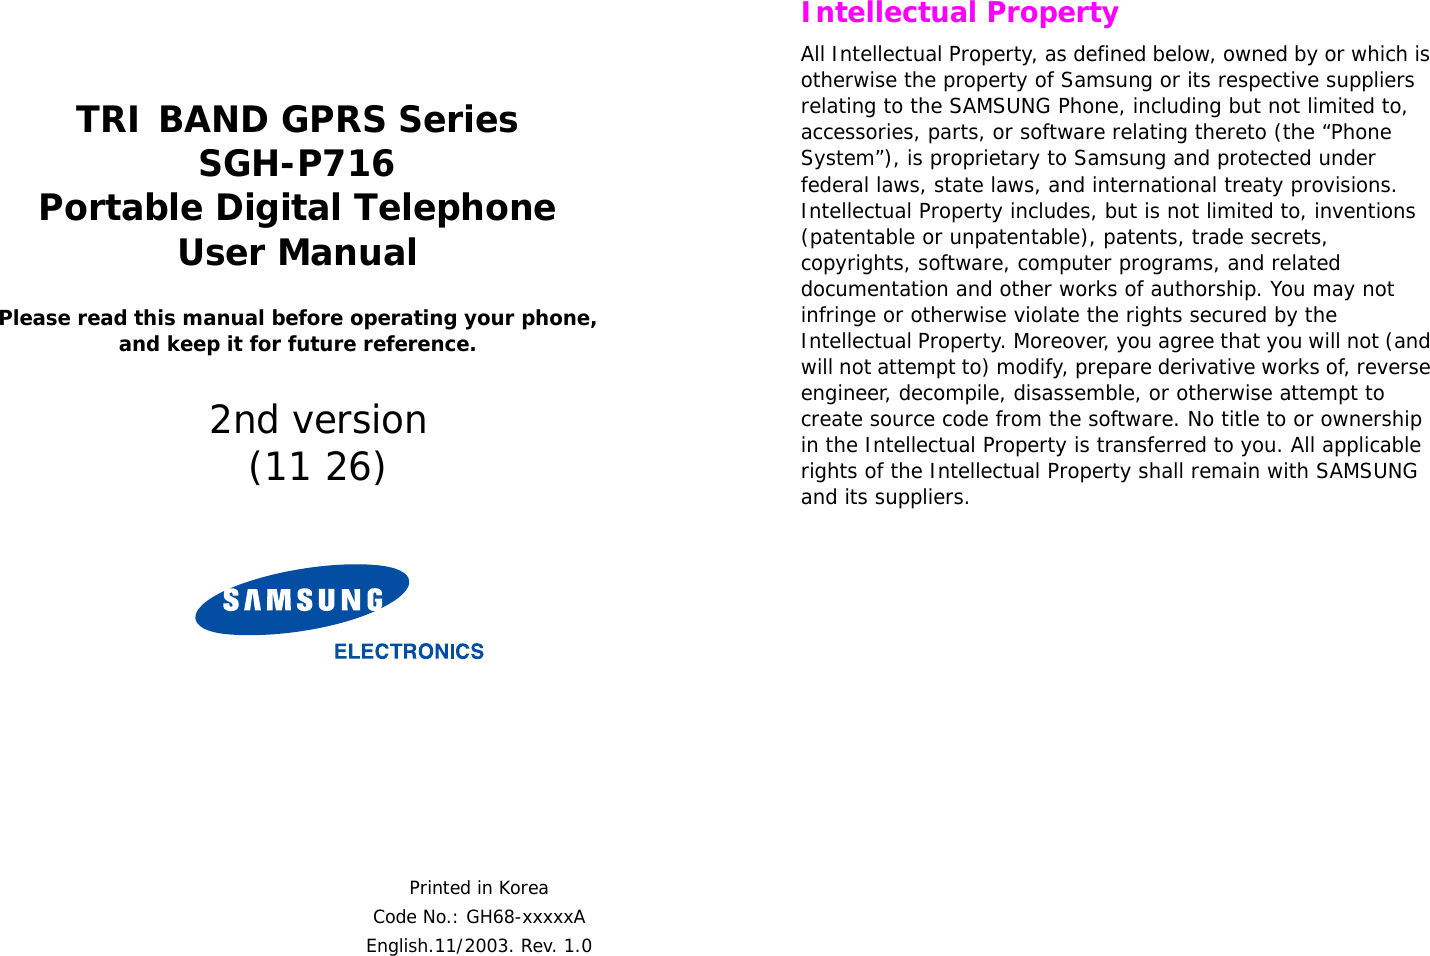  TRI BAND GPRS SeriesSGH-P716Portable Digital TelephoneUser ManualPlease read this manual before operating your phone, and keep it for future reference.Printed in KoreaCode No.: GH68-xxxxxAEnglish.11/2003. Rev. 1.02nd version(11 26) Intellectual PropertyAll Intellectual Property, as defined below, owned by or which is otherwise the property of Samsung or its respective suppliers relating to the SAMSUNG Phone, including but not limited to, accessories, parts, or software relating thereto (the “Phone System”), is proprietary to Samsung and protected under federal laws, state laws, and international treaty provisions. Intellectual Property includes, but is not limited to, inventions (patentable or unpatentable), patents, trade secrets, copyrights, software, computer programs, and related documentation and other works of authorship. You may not infringe or otherwise violate the rights secured by the Intellectual Property. Moreover, you agree that you will not (and will not attempt to) modify, prepare derivative works of, reverse engineer, decompile, disassemble, or otherwise attempt to create source code from the software. No title to or ownership in the Intellectual Property is transferred to you. All applicable rights of the Intellectual Property shall remain with SAMSUNG and its suppliers.